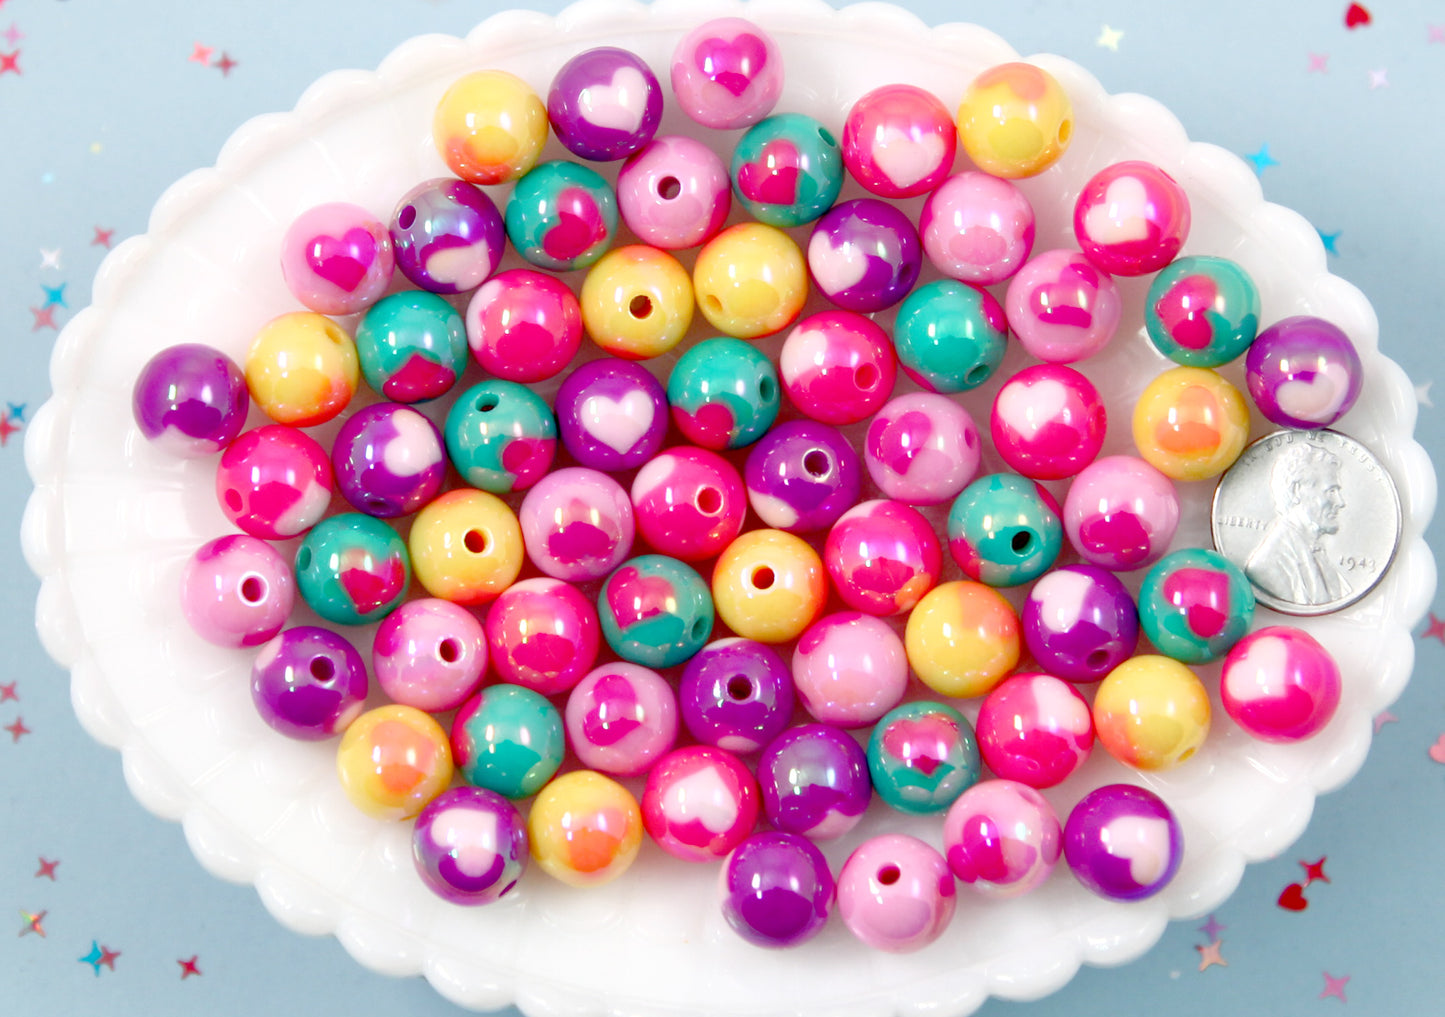 Heart Resin Beads - 12mm Small Inlaid Heart Pattern Gumball Bubblegum Resin or Acrylic Beads - 25 pcs set